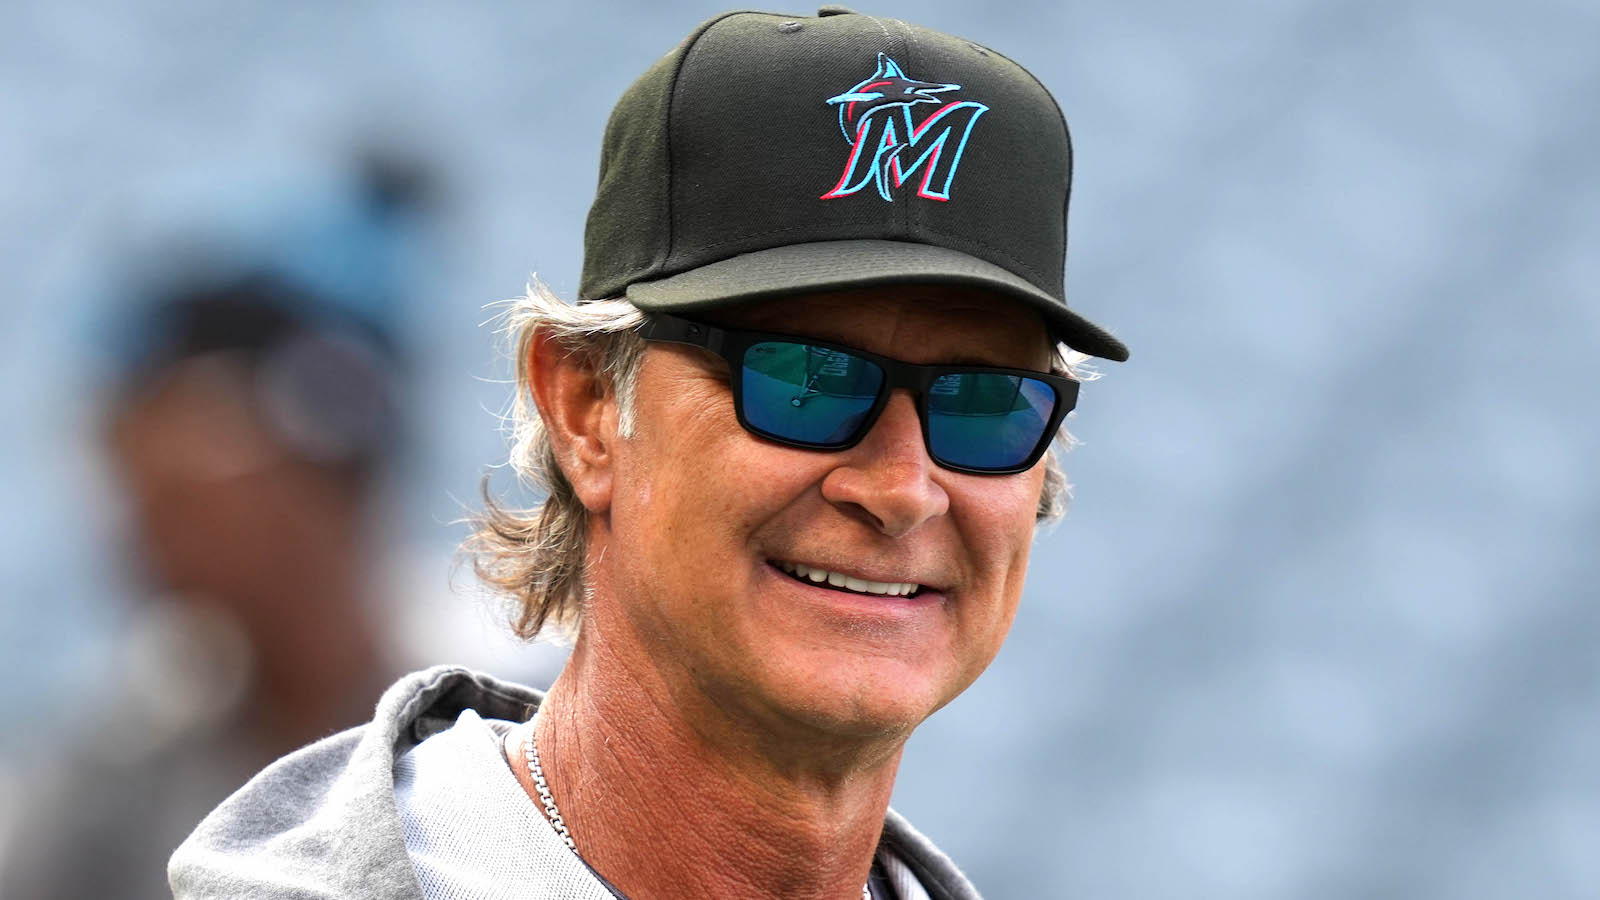 Don Mattingly interviews for Marlins manager job, per reports